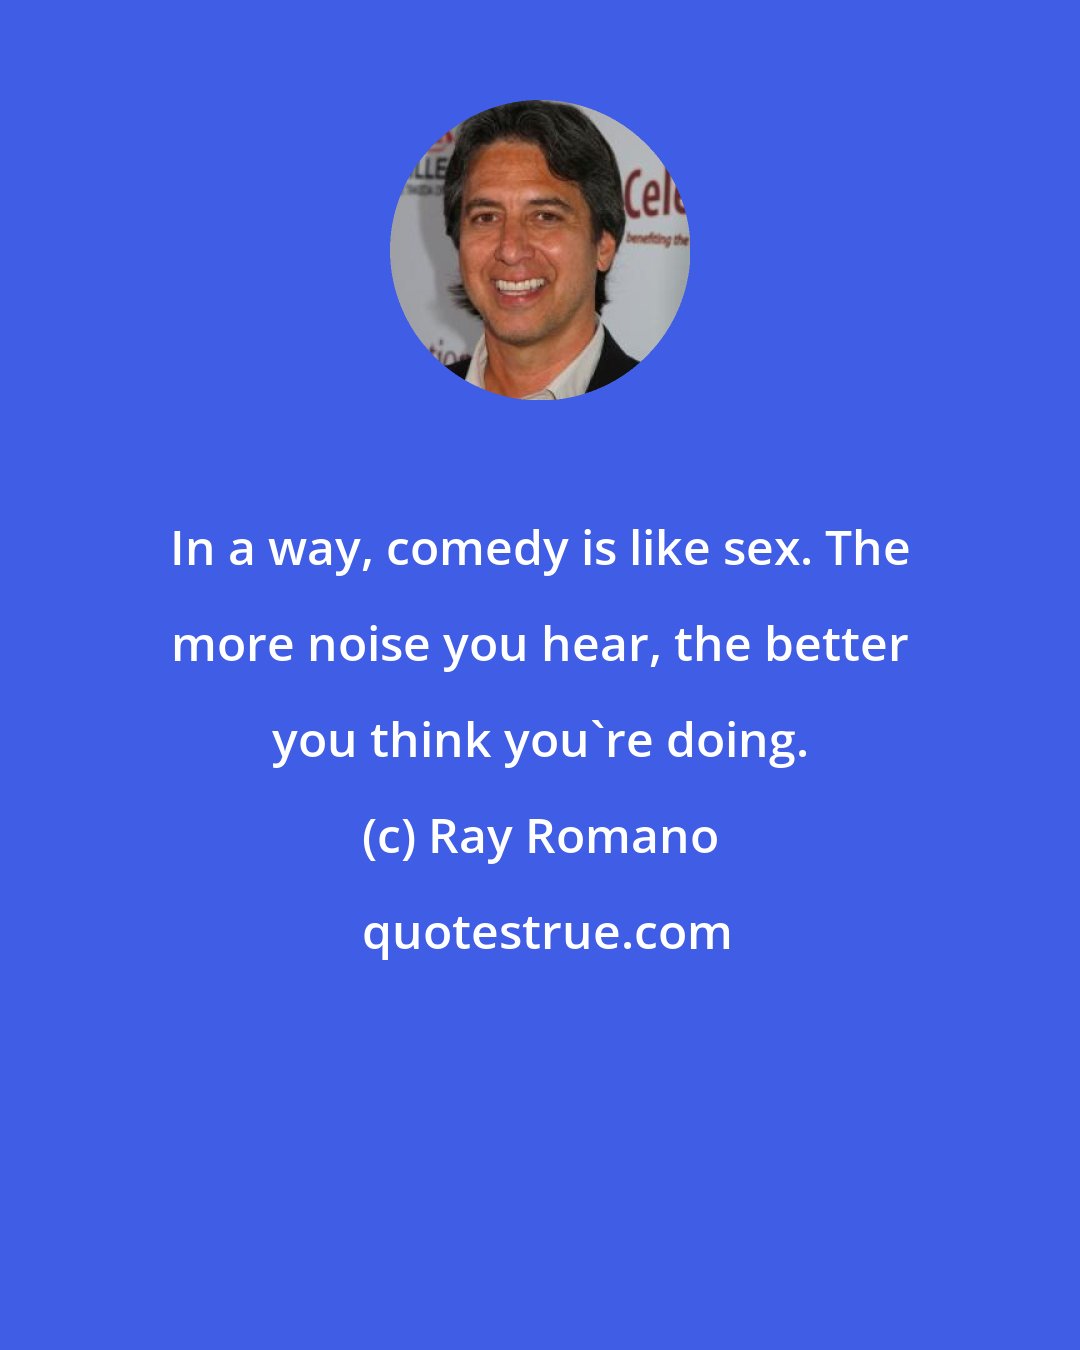 Ray Romano: In a way, comedy is like sex. The more noise you hear, the better you think you're doing.